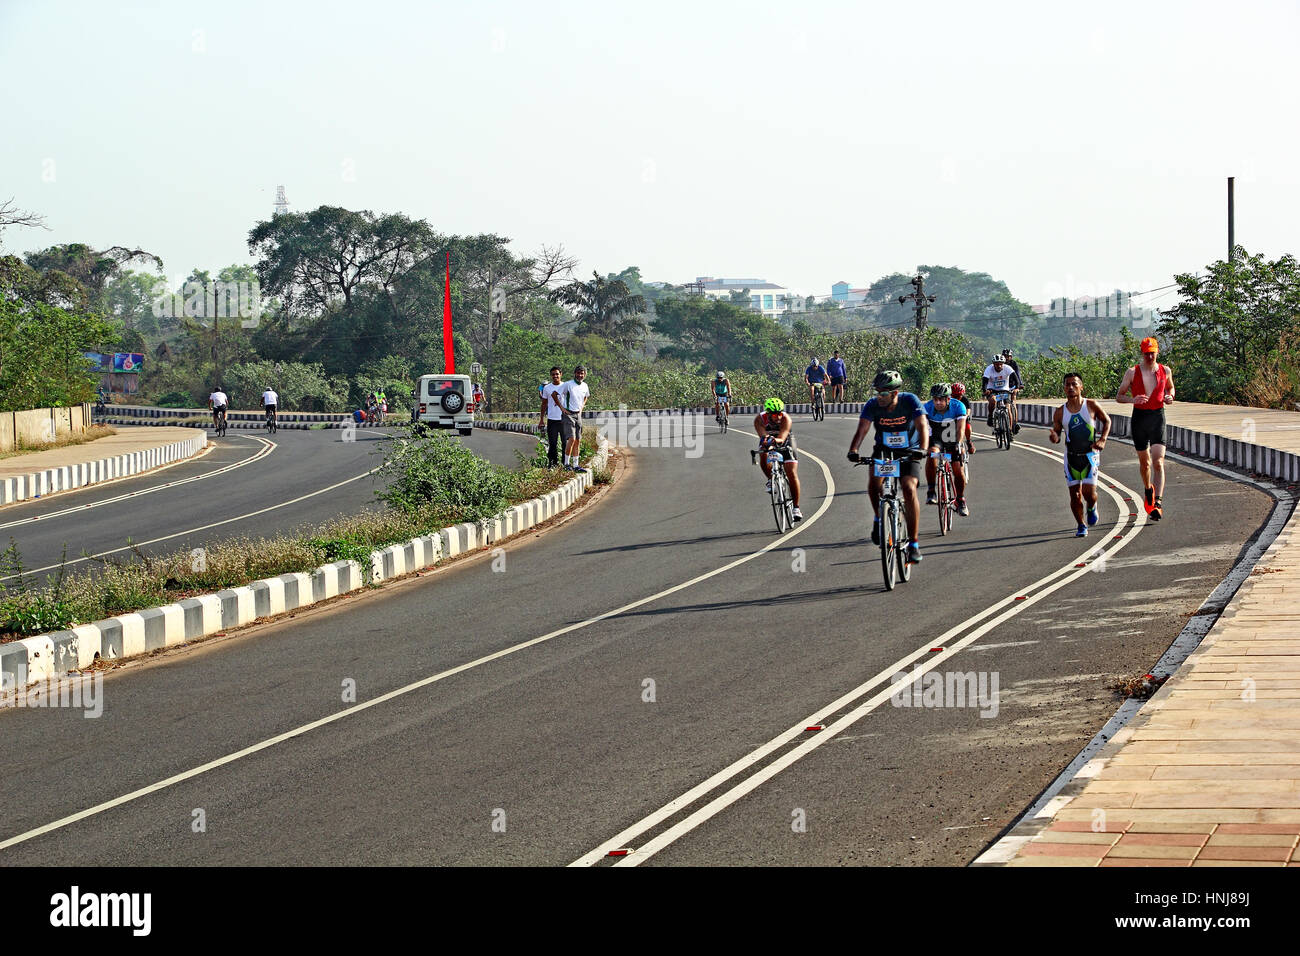 Participants in Goa Triathlon 2017, after finishing swimming part, competing in the running and cycling leg in the scenic highway at Bambolim in Goa Stock Photo